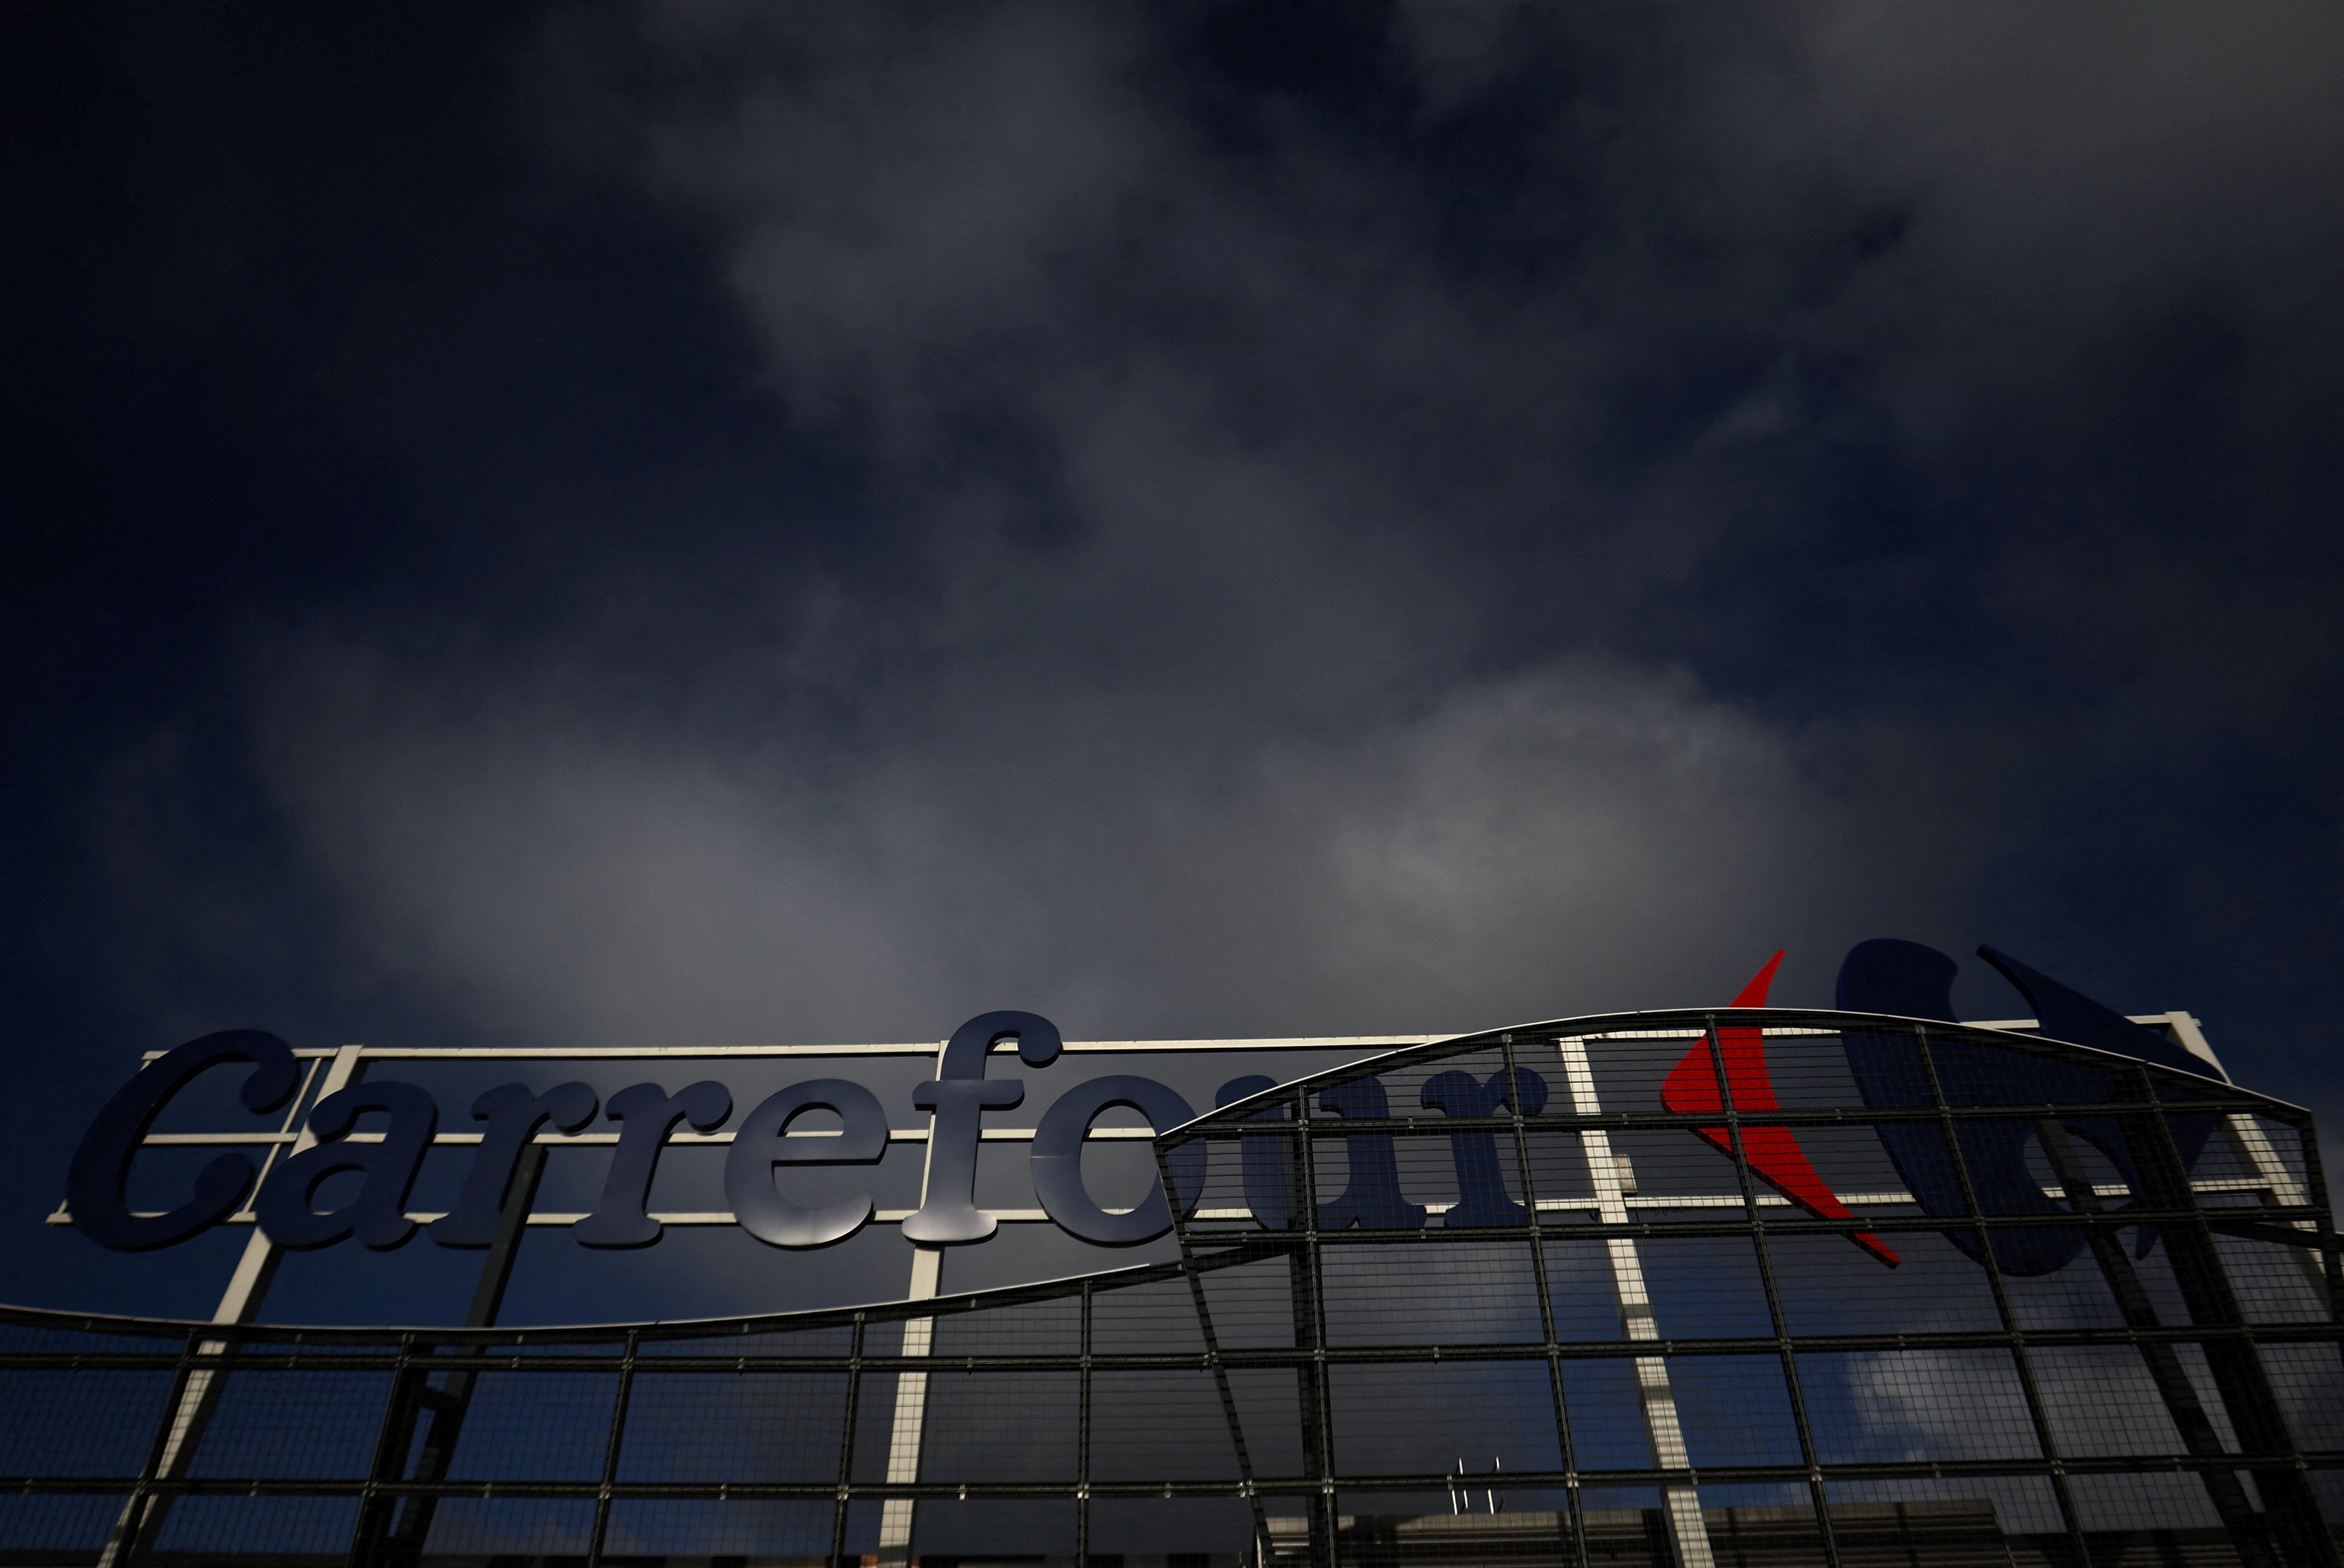 The logo of Carrefour sits atop on the roof of a shopping center in Drogenbos near Brussels